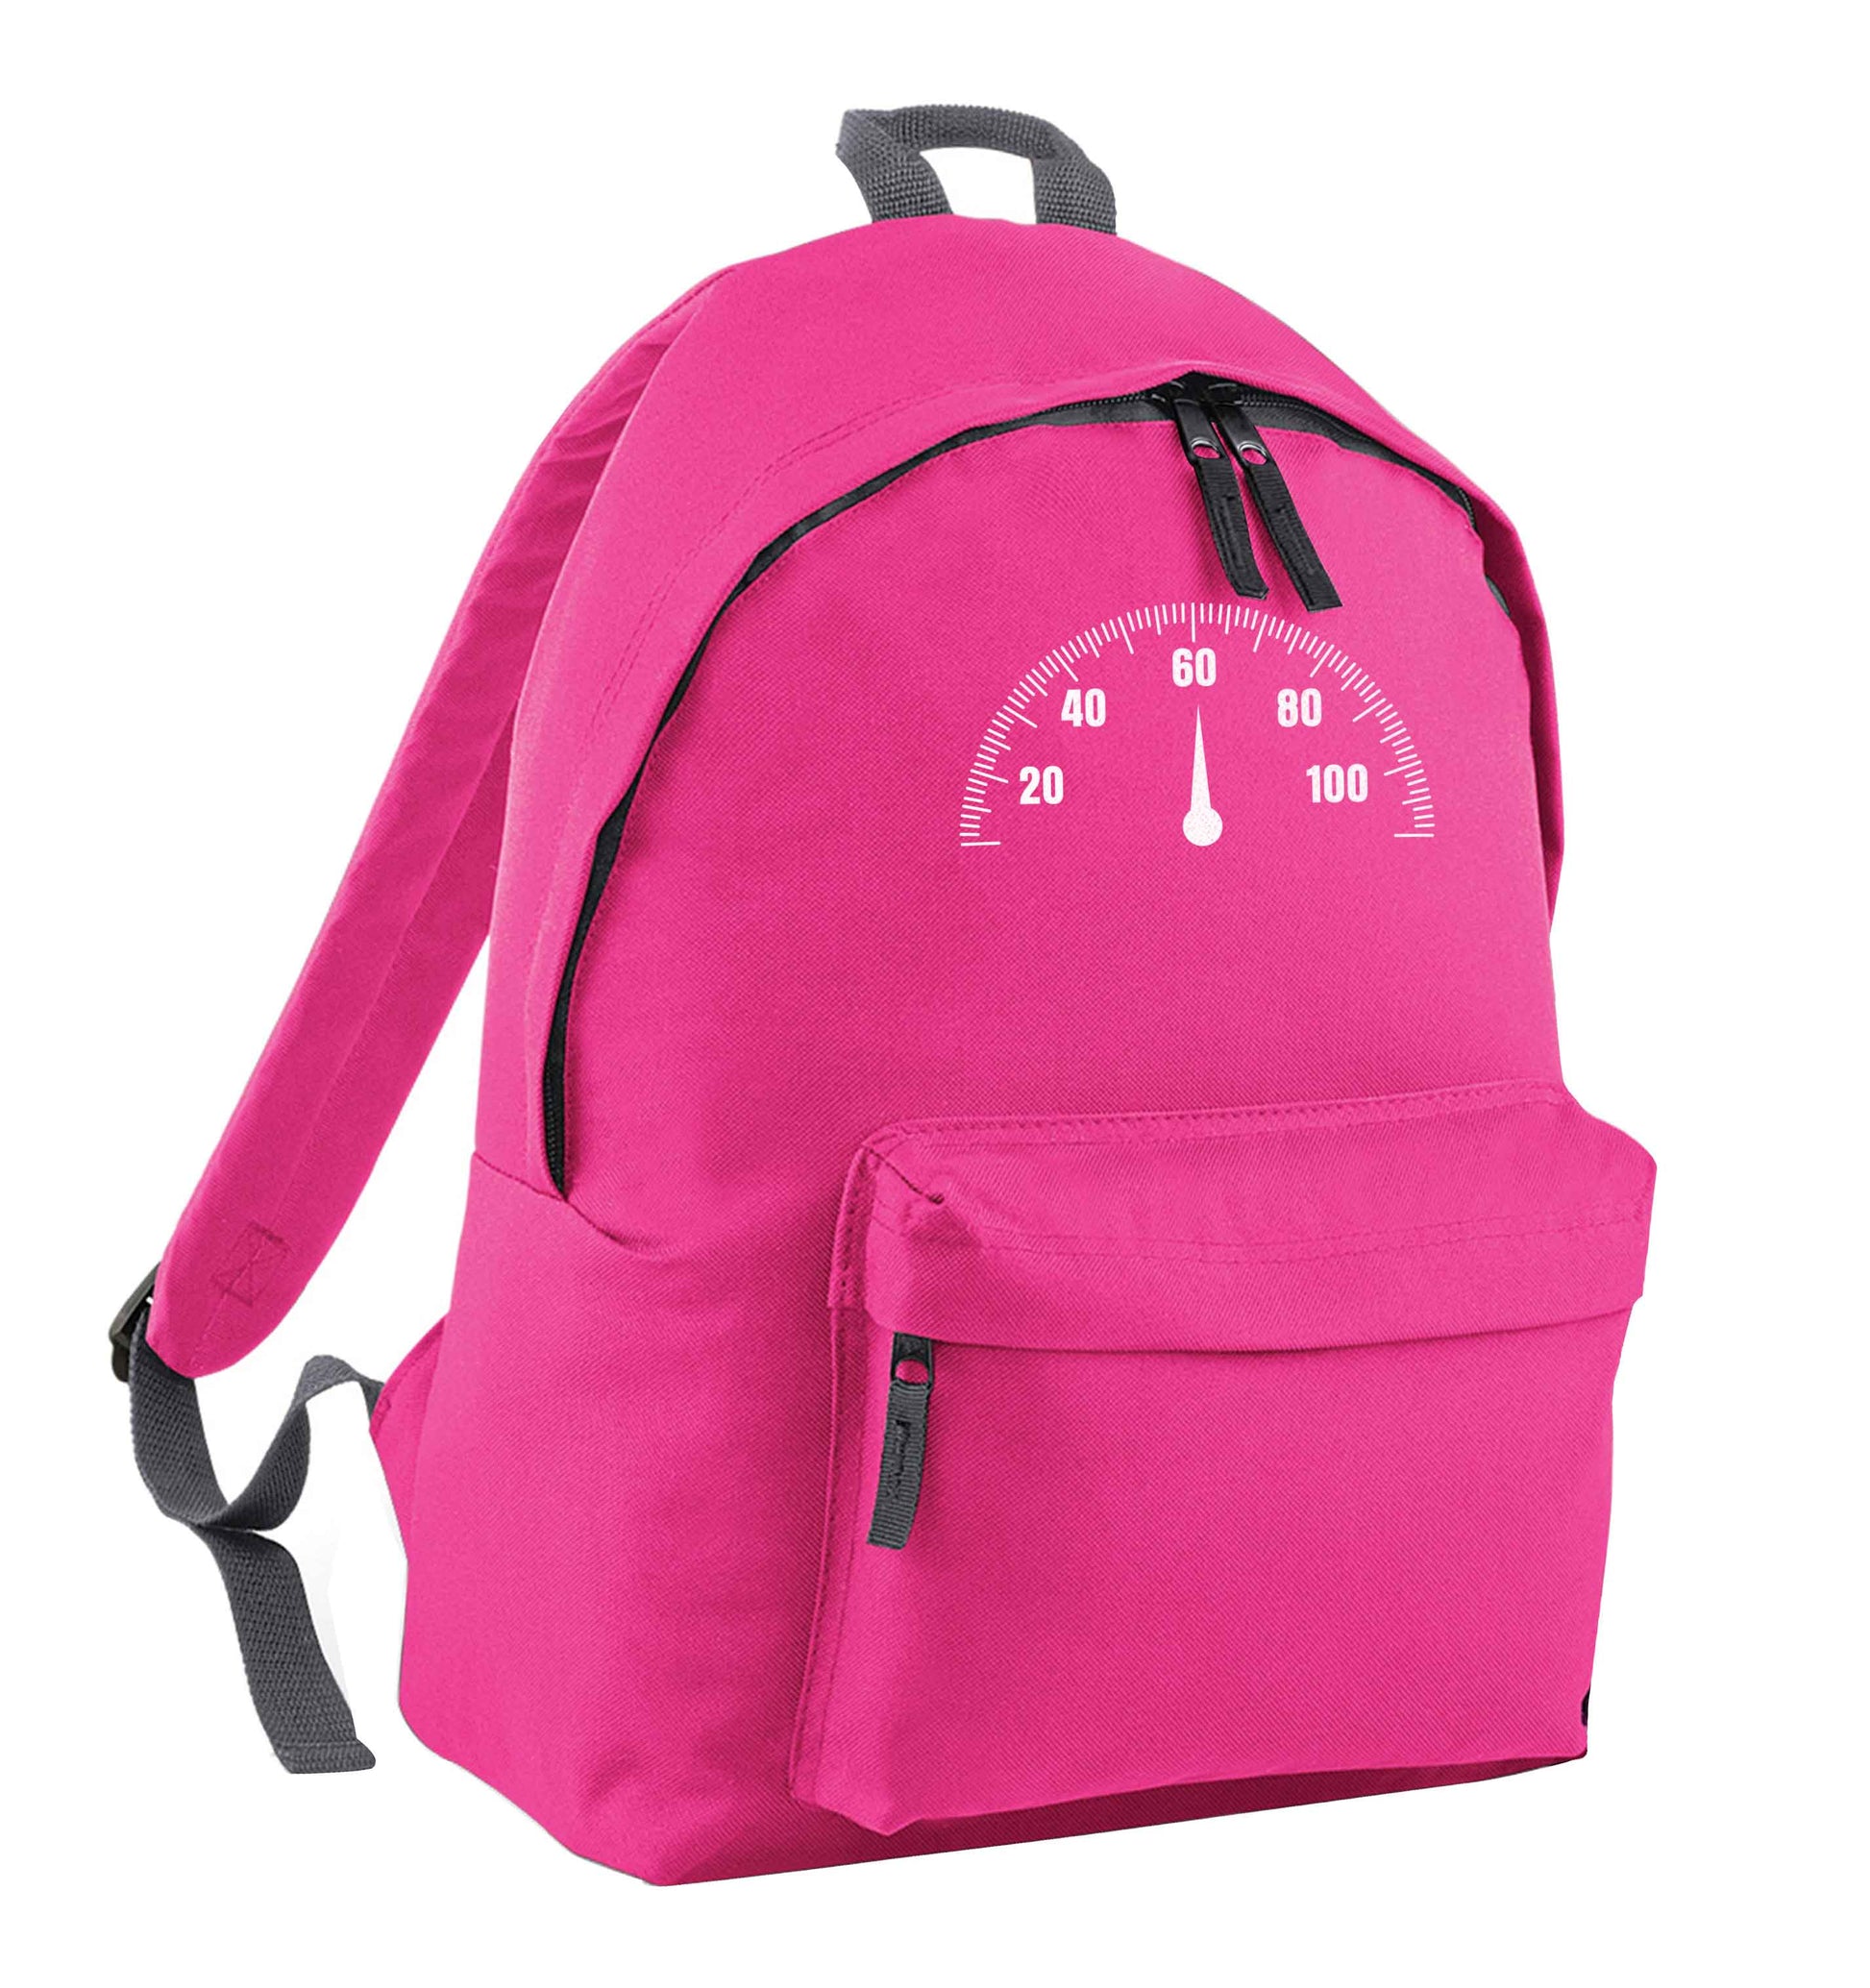 Speed dial 60 pink adults backpack